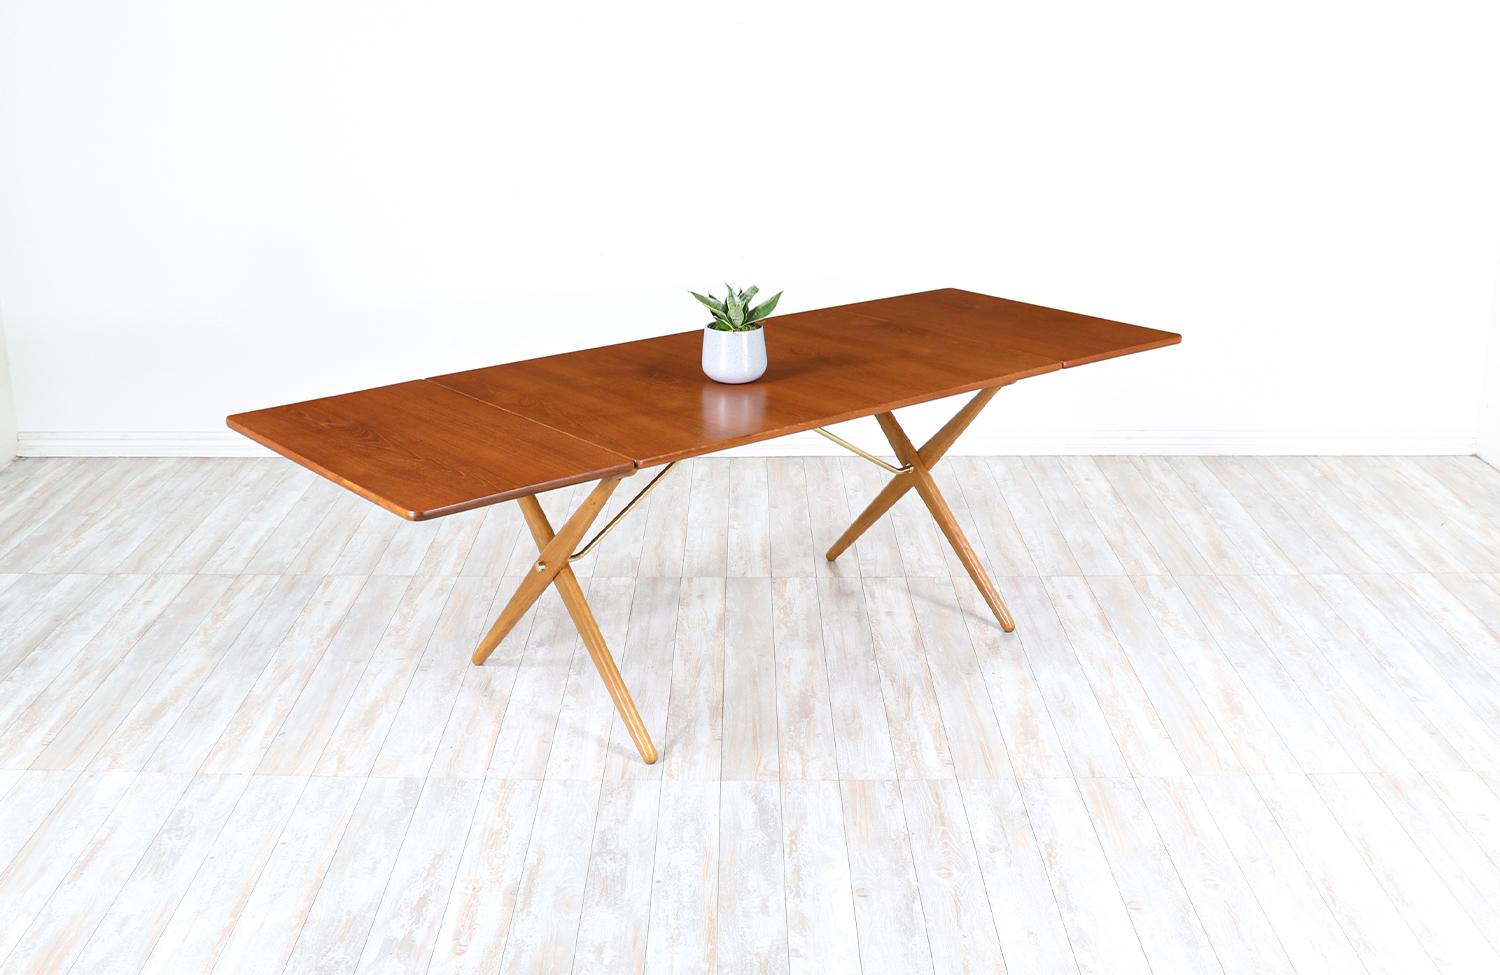 X-legged dining table designed by Hans J. Wegner for Andreas Tuck in Denmark in 1950s. The iconic AT-309 table is comprised of a teak wood top with two drop-leaves. The crossed oak wood X legs are supported by brass metal struts that provide